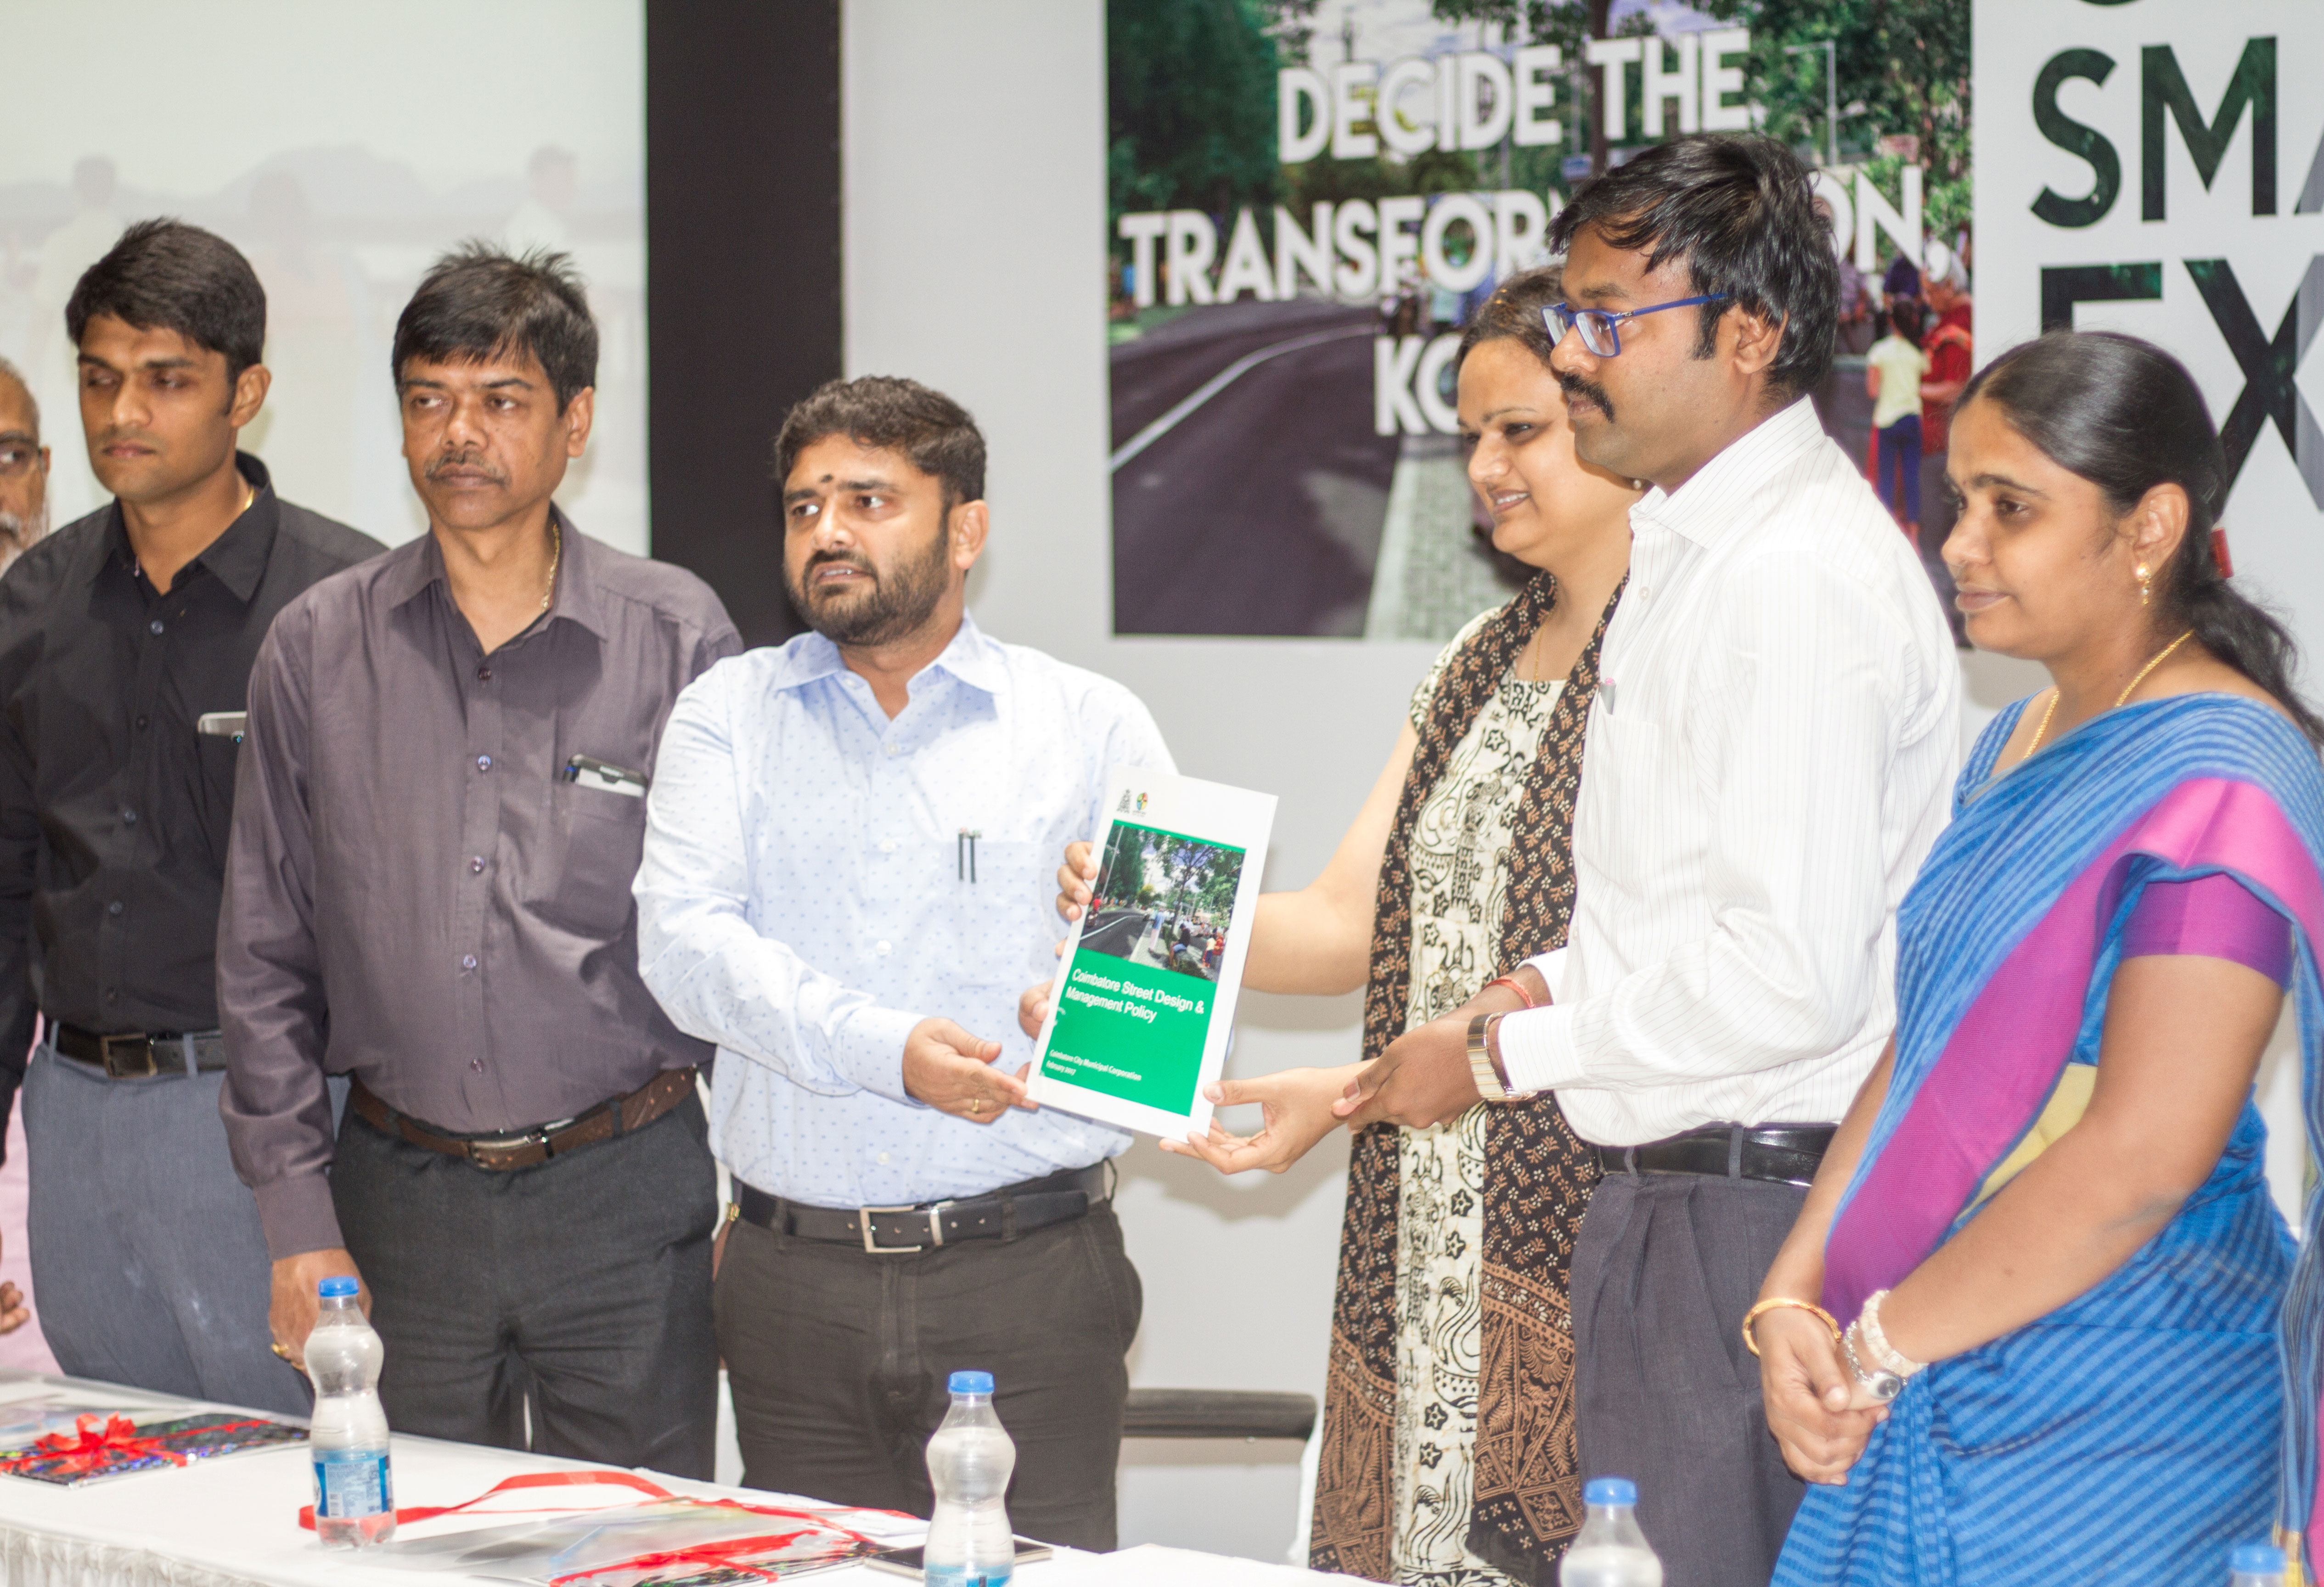 The Coimbatore Street Design & Management Policy was launched in the presence of the dignitaries of the day: Left to Right - Mr. Sandeep Nanduri IAS, Commissioner of Madurai City Municipal Corporation, Mr. T.K.Majumdar, Director, Internal Finance, Ministry of Urban Development, Mr. Prakash Govindasami IAS, Commissioner of Municipal Administration, Ms. Shreya Gadepalli, Director- South Asia, ITDP, Dr. K.VIjayakarthikeyan IAS, Commissioner of Coimbatore City Municipal Corporation, Ms. P.Gandhimathi, Deputy Commissioner, Coimbatore City Municipal Corporation